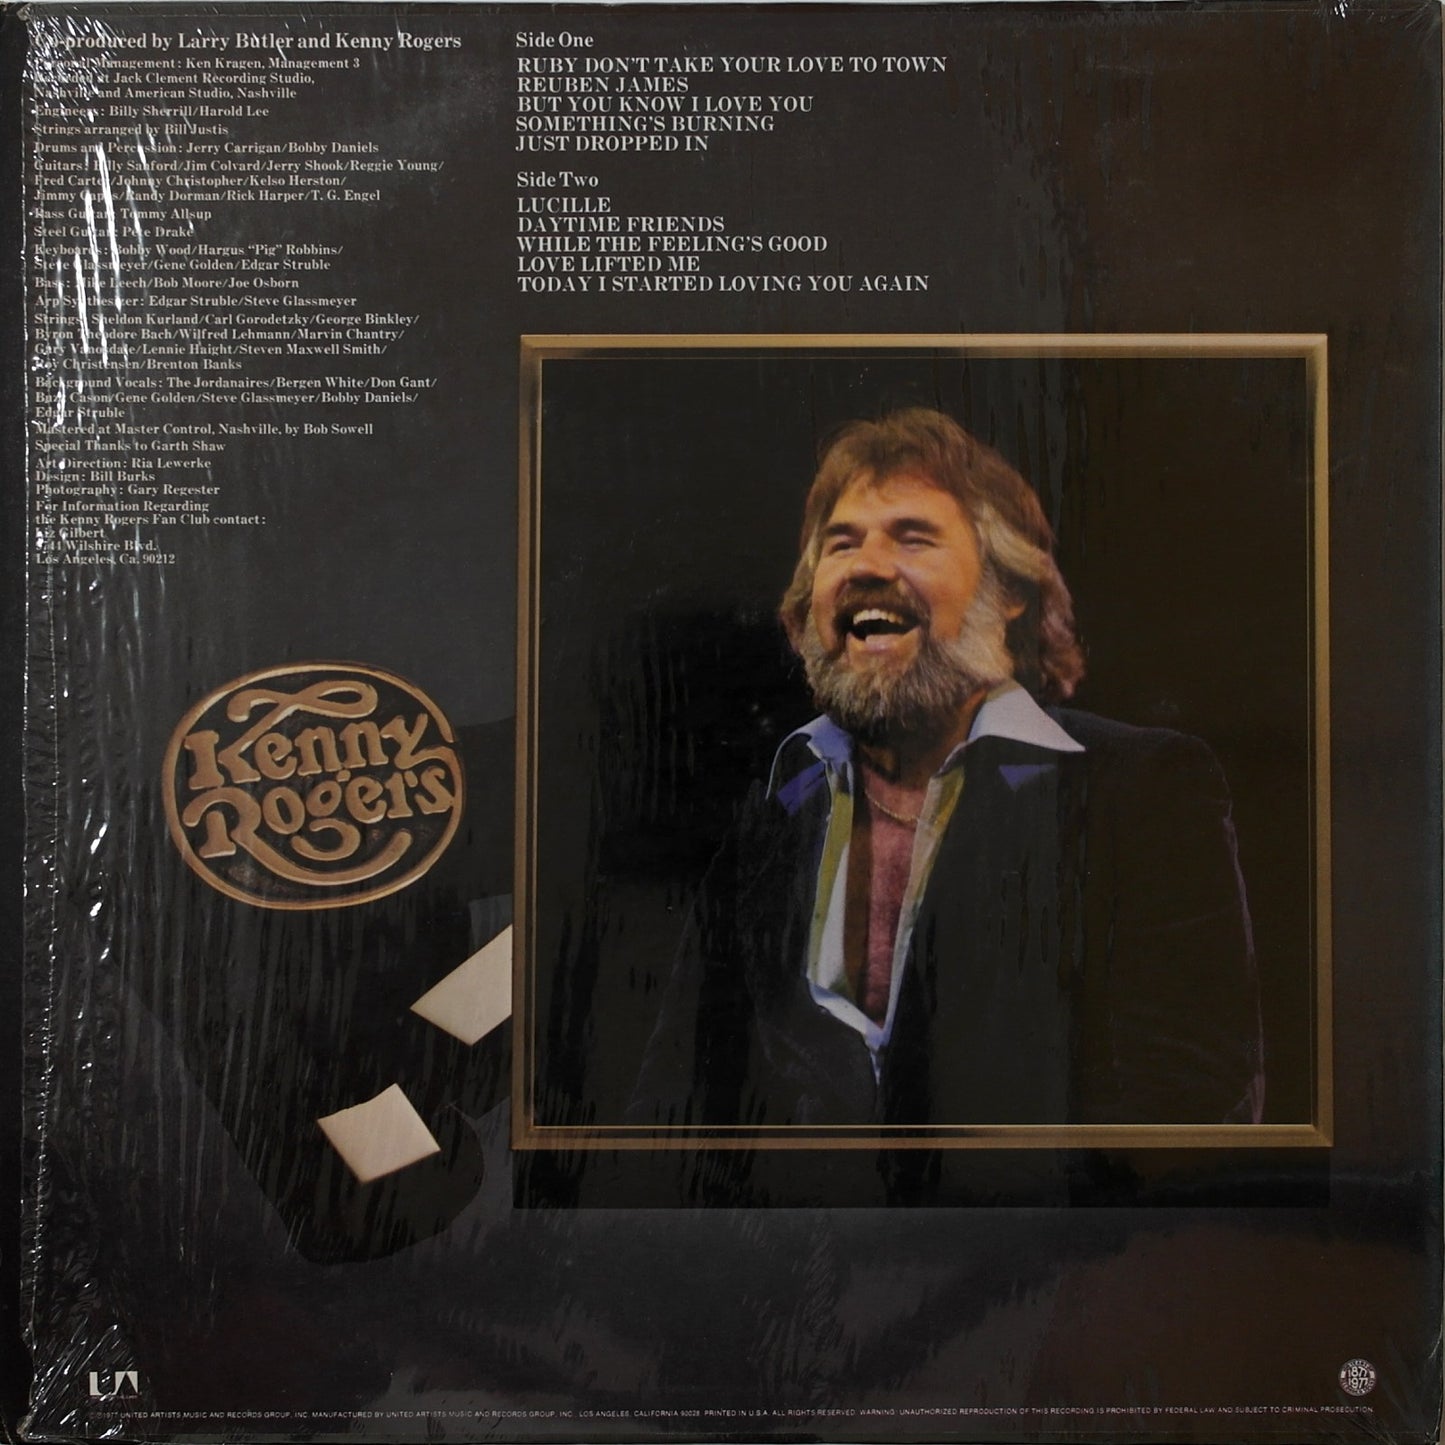 KENNY ROGERS - Ten Years Of Gold